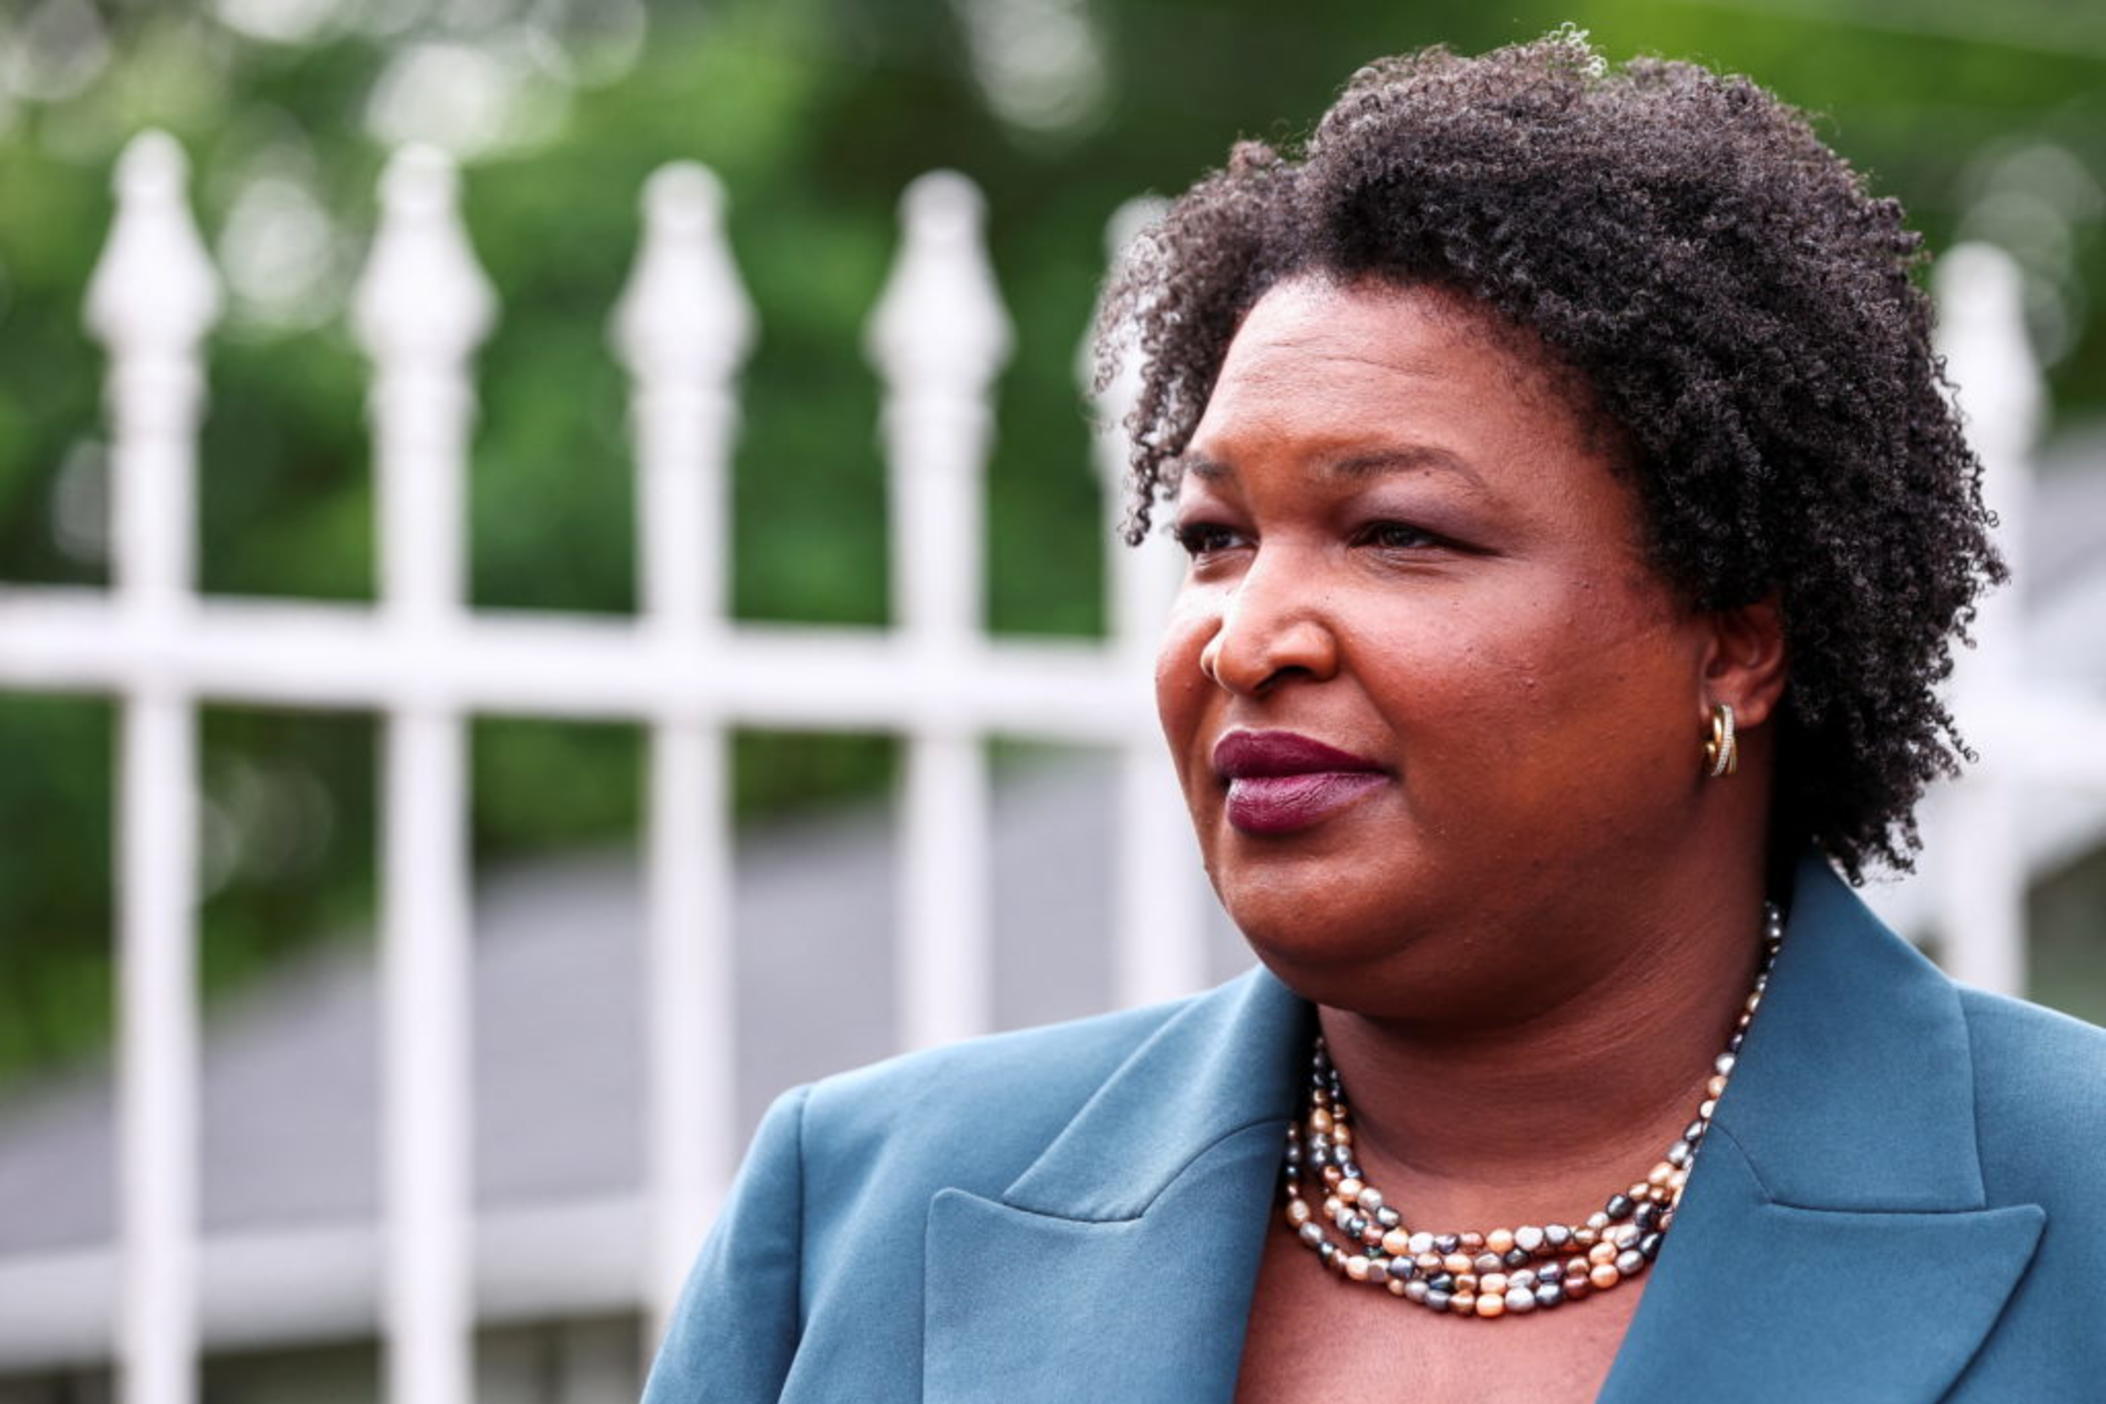 Democratic gubernatorial candidate Stacey Abrams looks on at a news conference during the primary election in Atlanta, Georgia, U.S. May 24, 2022. Photo by Dustin Chambers/REUTERS